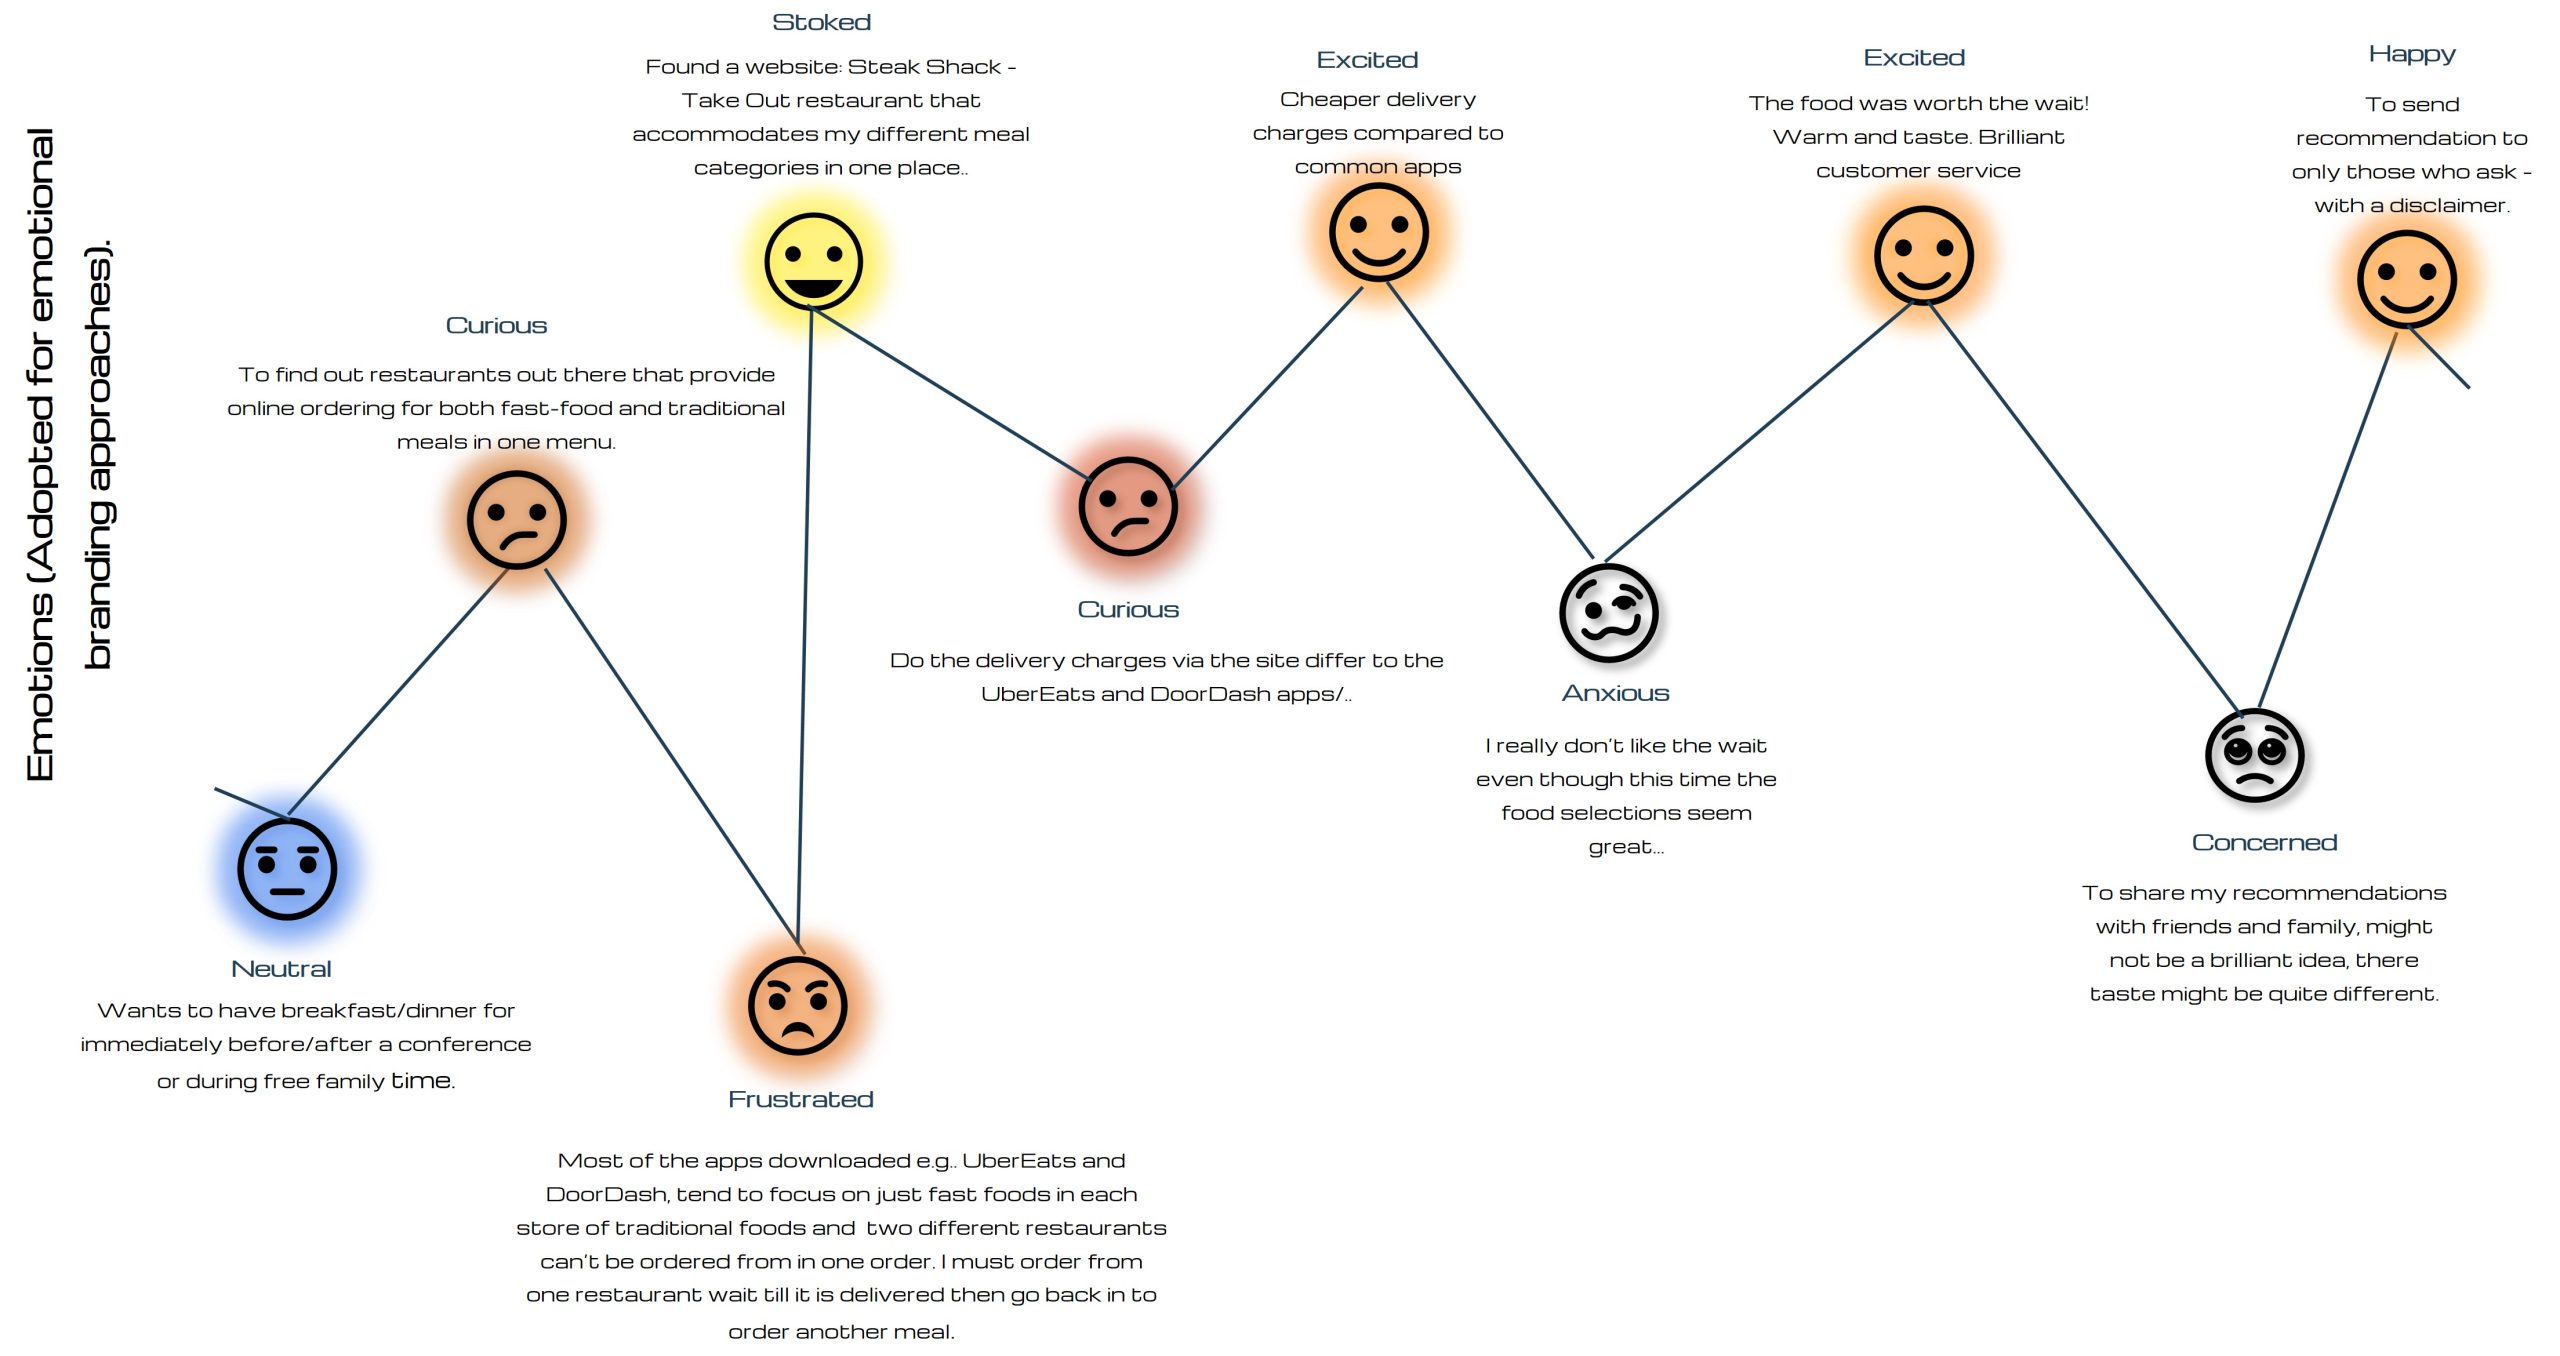 Emotional pain-joy-points. Designed and Developed by Tabitha@wiki